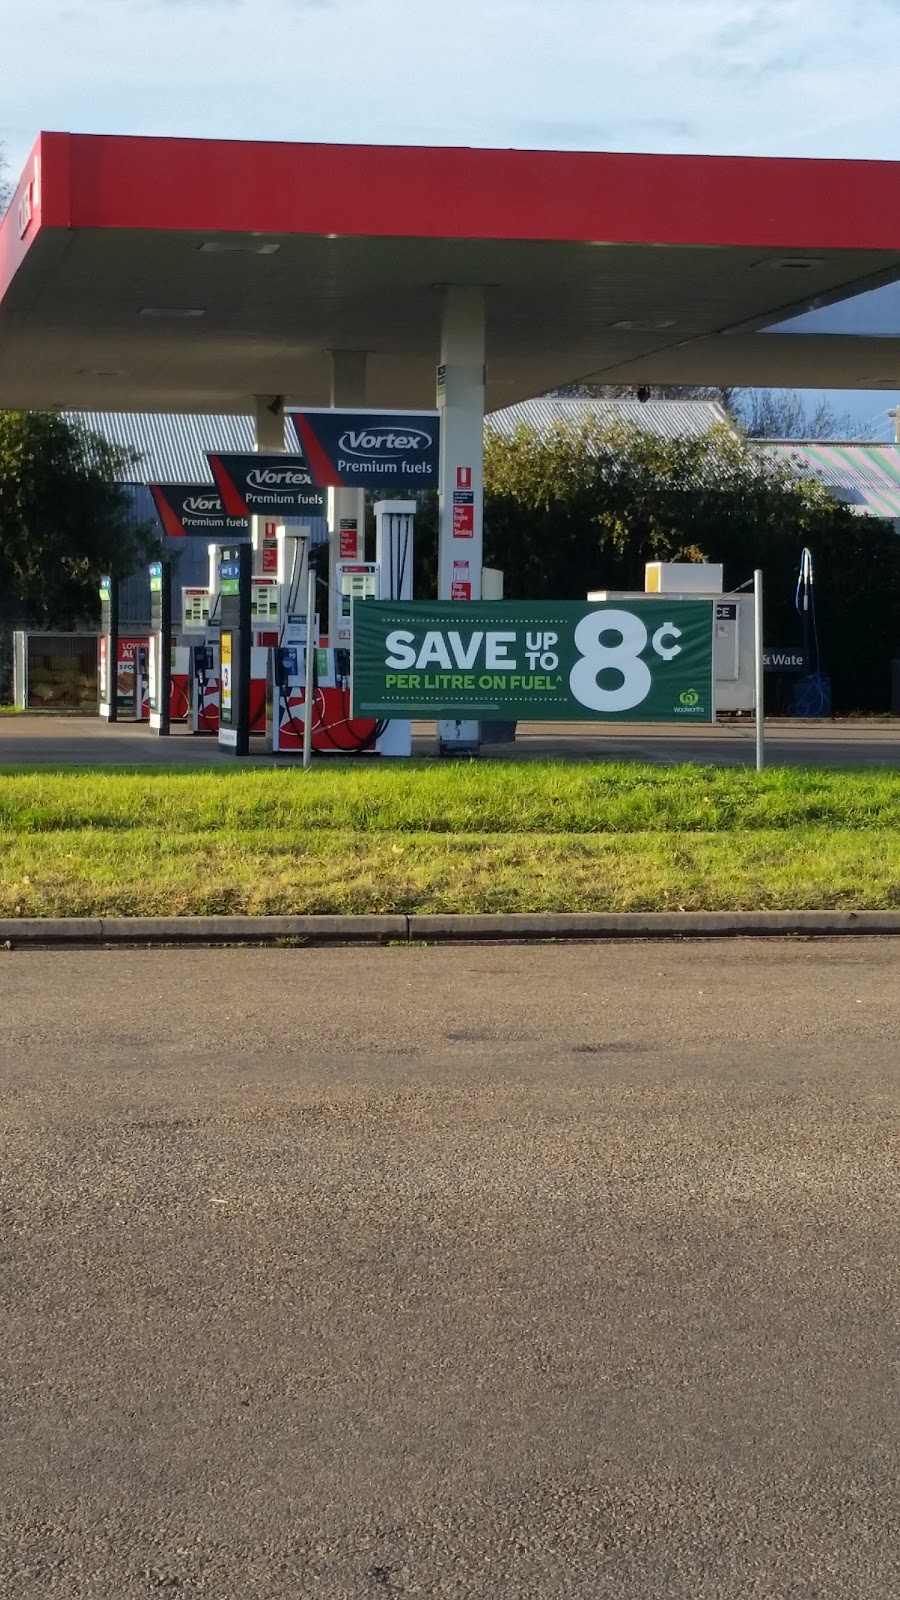 Caltex Woolworths | gas station | 88 Murray St, Cootamundra NSW 2590, Australia | 0269426092 OR +61 2 6942 6092